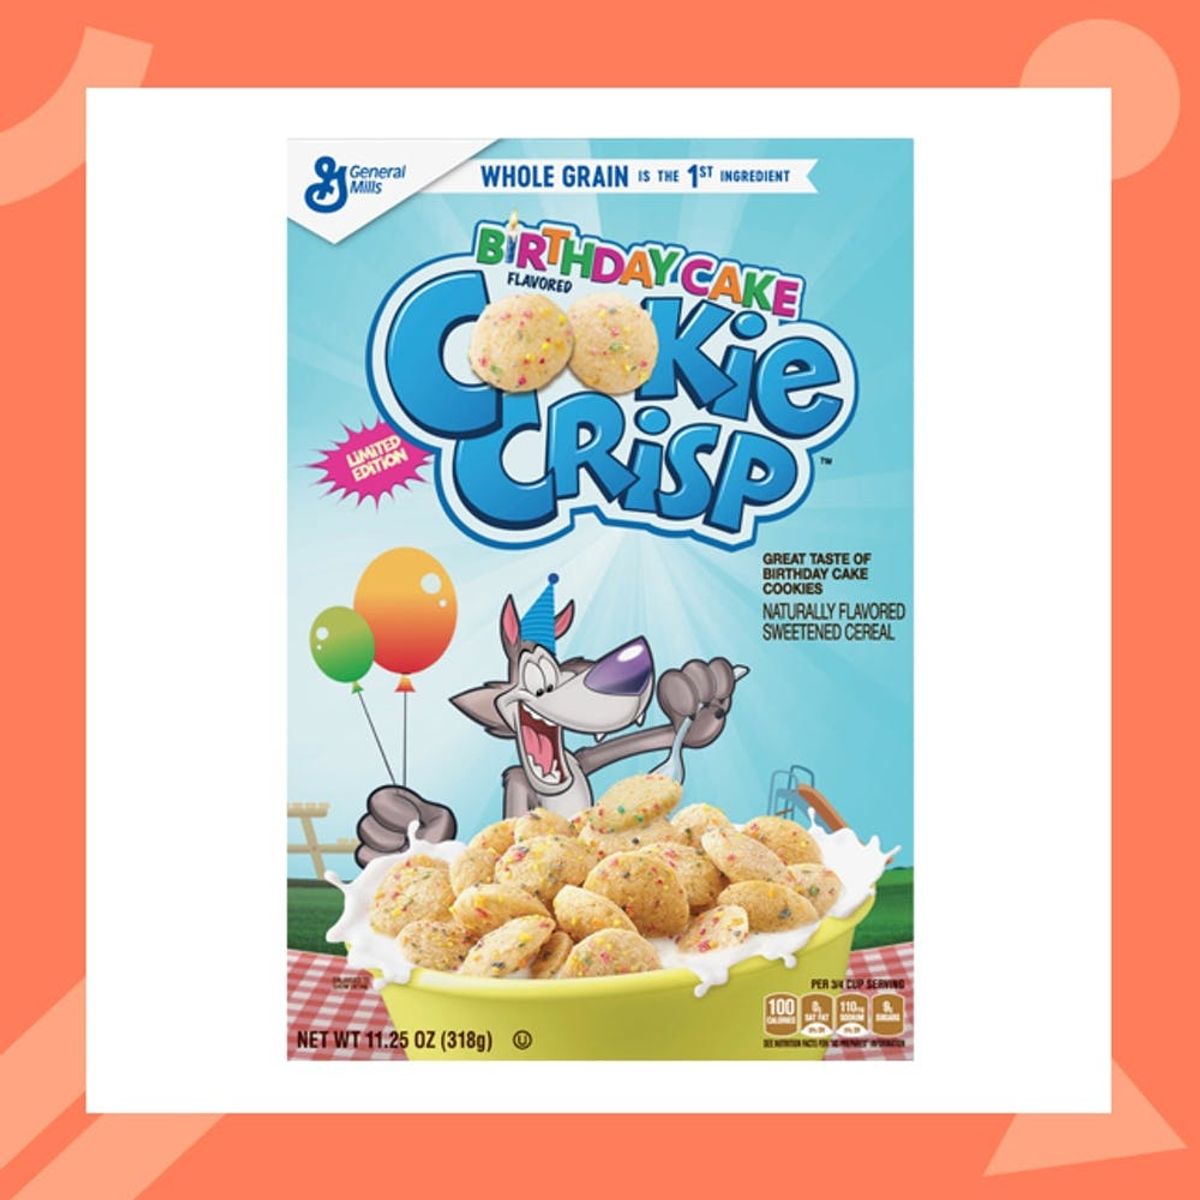 Birthday-Cake-Flavored Cookie Crisp Is Coming So Every Morning Is a Celebration